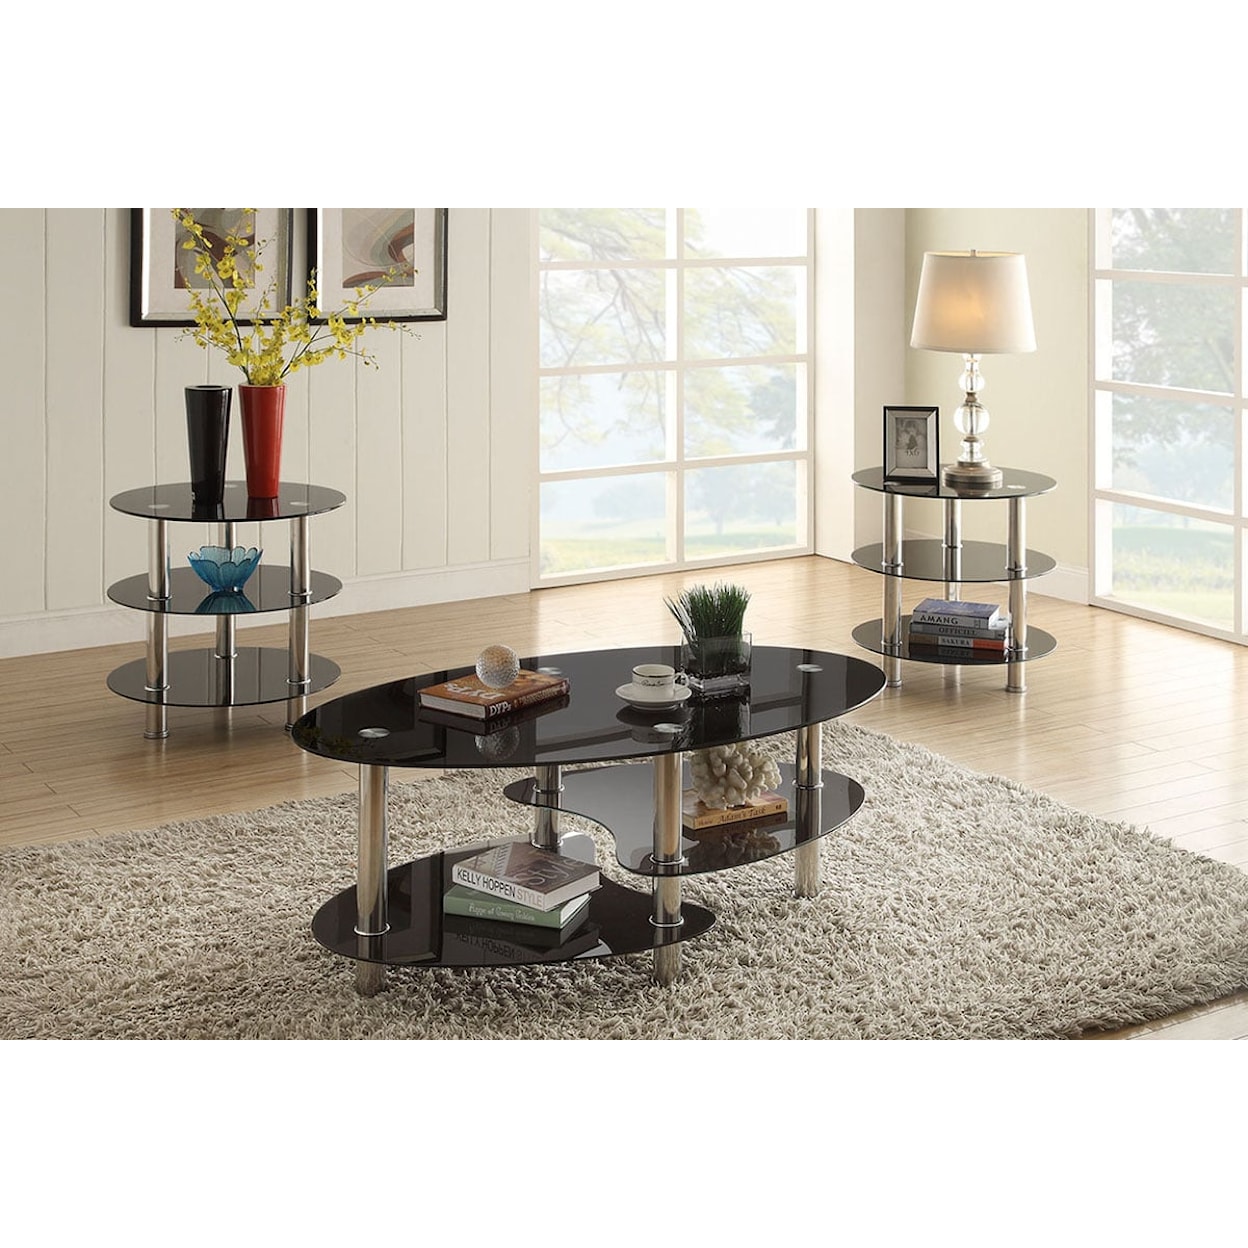 Poundex Occasional Tables BLACK & GLASS 3 PC OCCASIONAL SET |